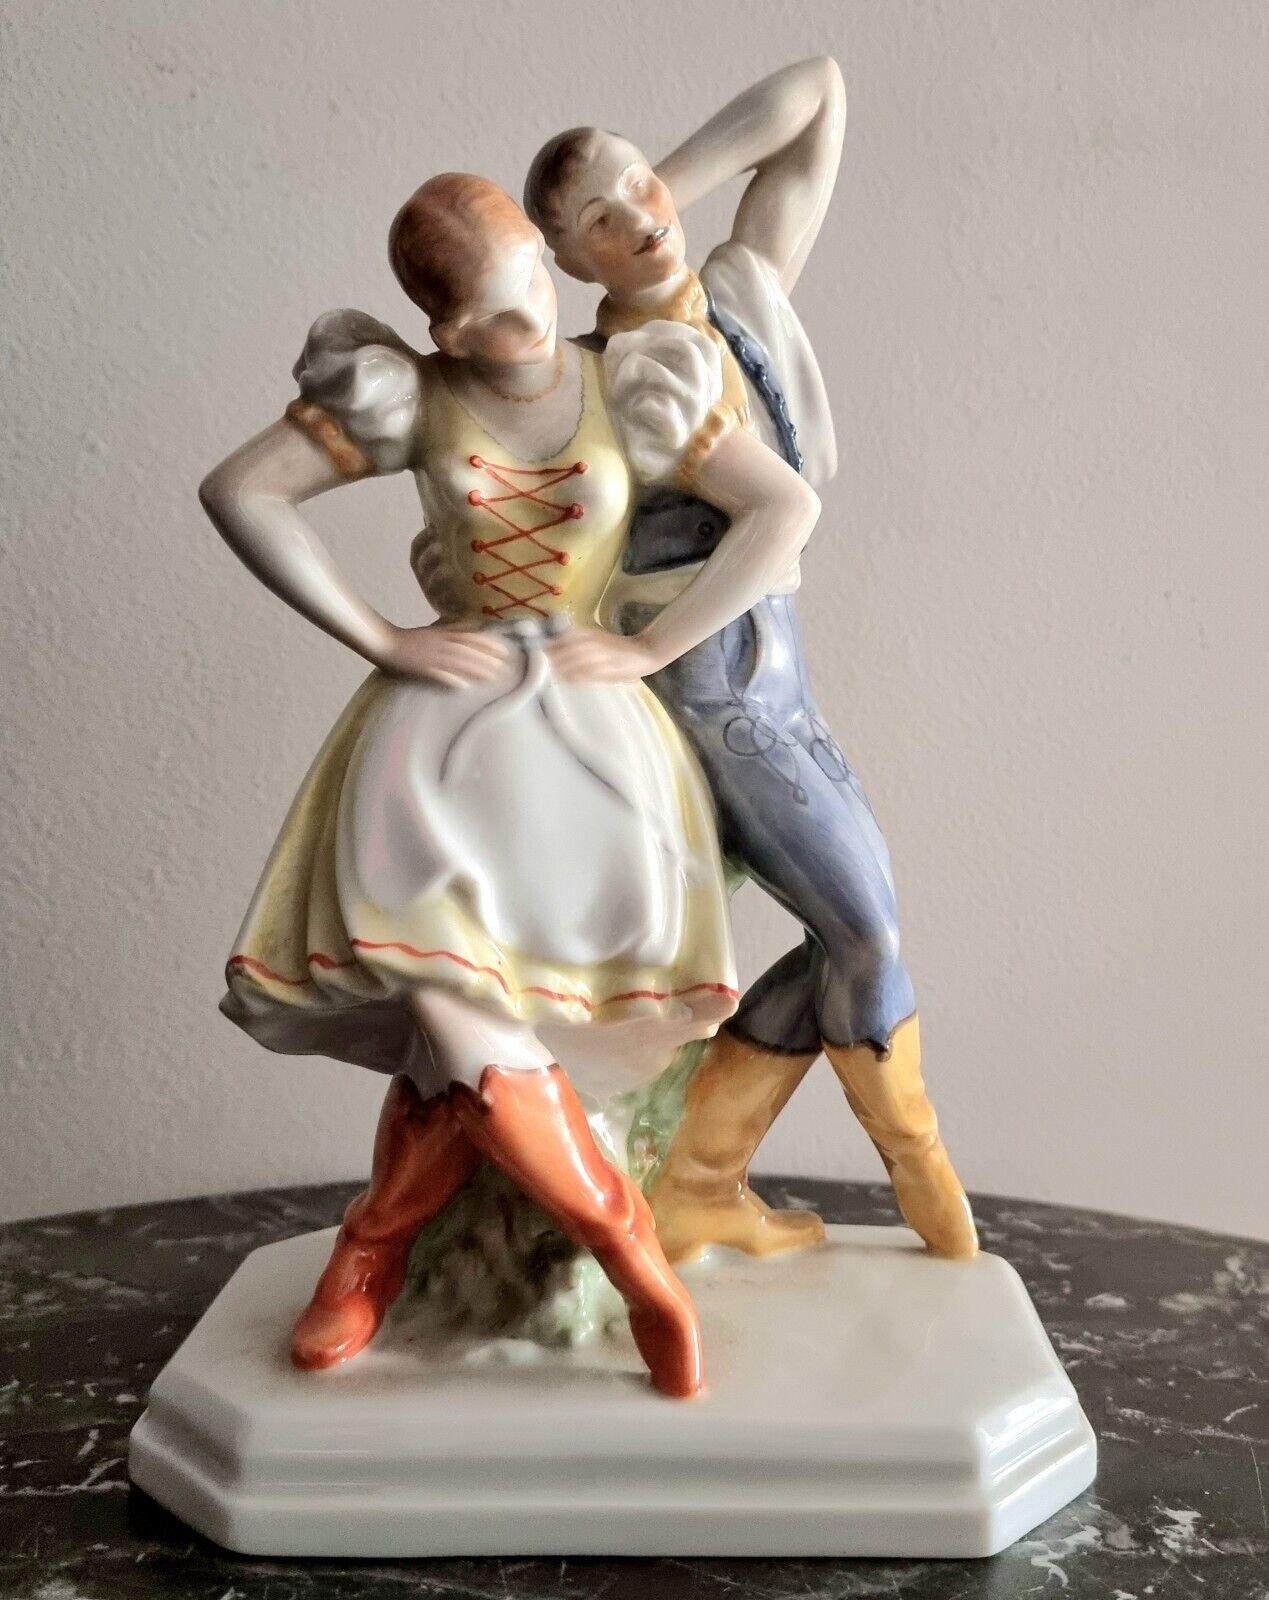 HEREND 1941, signed, numbered,
Porcelain statuette 'Dancers',
Vintage,
height 25,5 cm, weight 918 g, socle 16 x 9,8 cm,
good condition.

Herend was founded in 1826 and has had much famous customers who bought it's porcelain. At the first World's